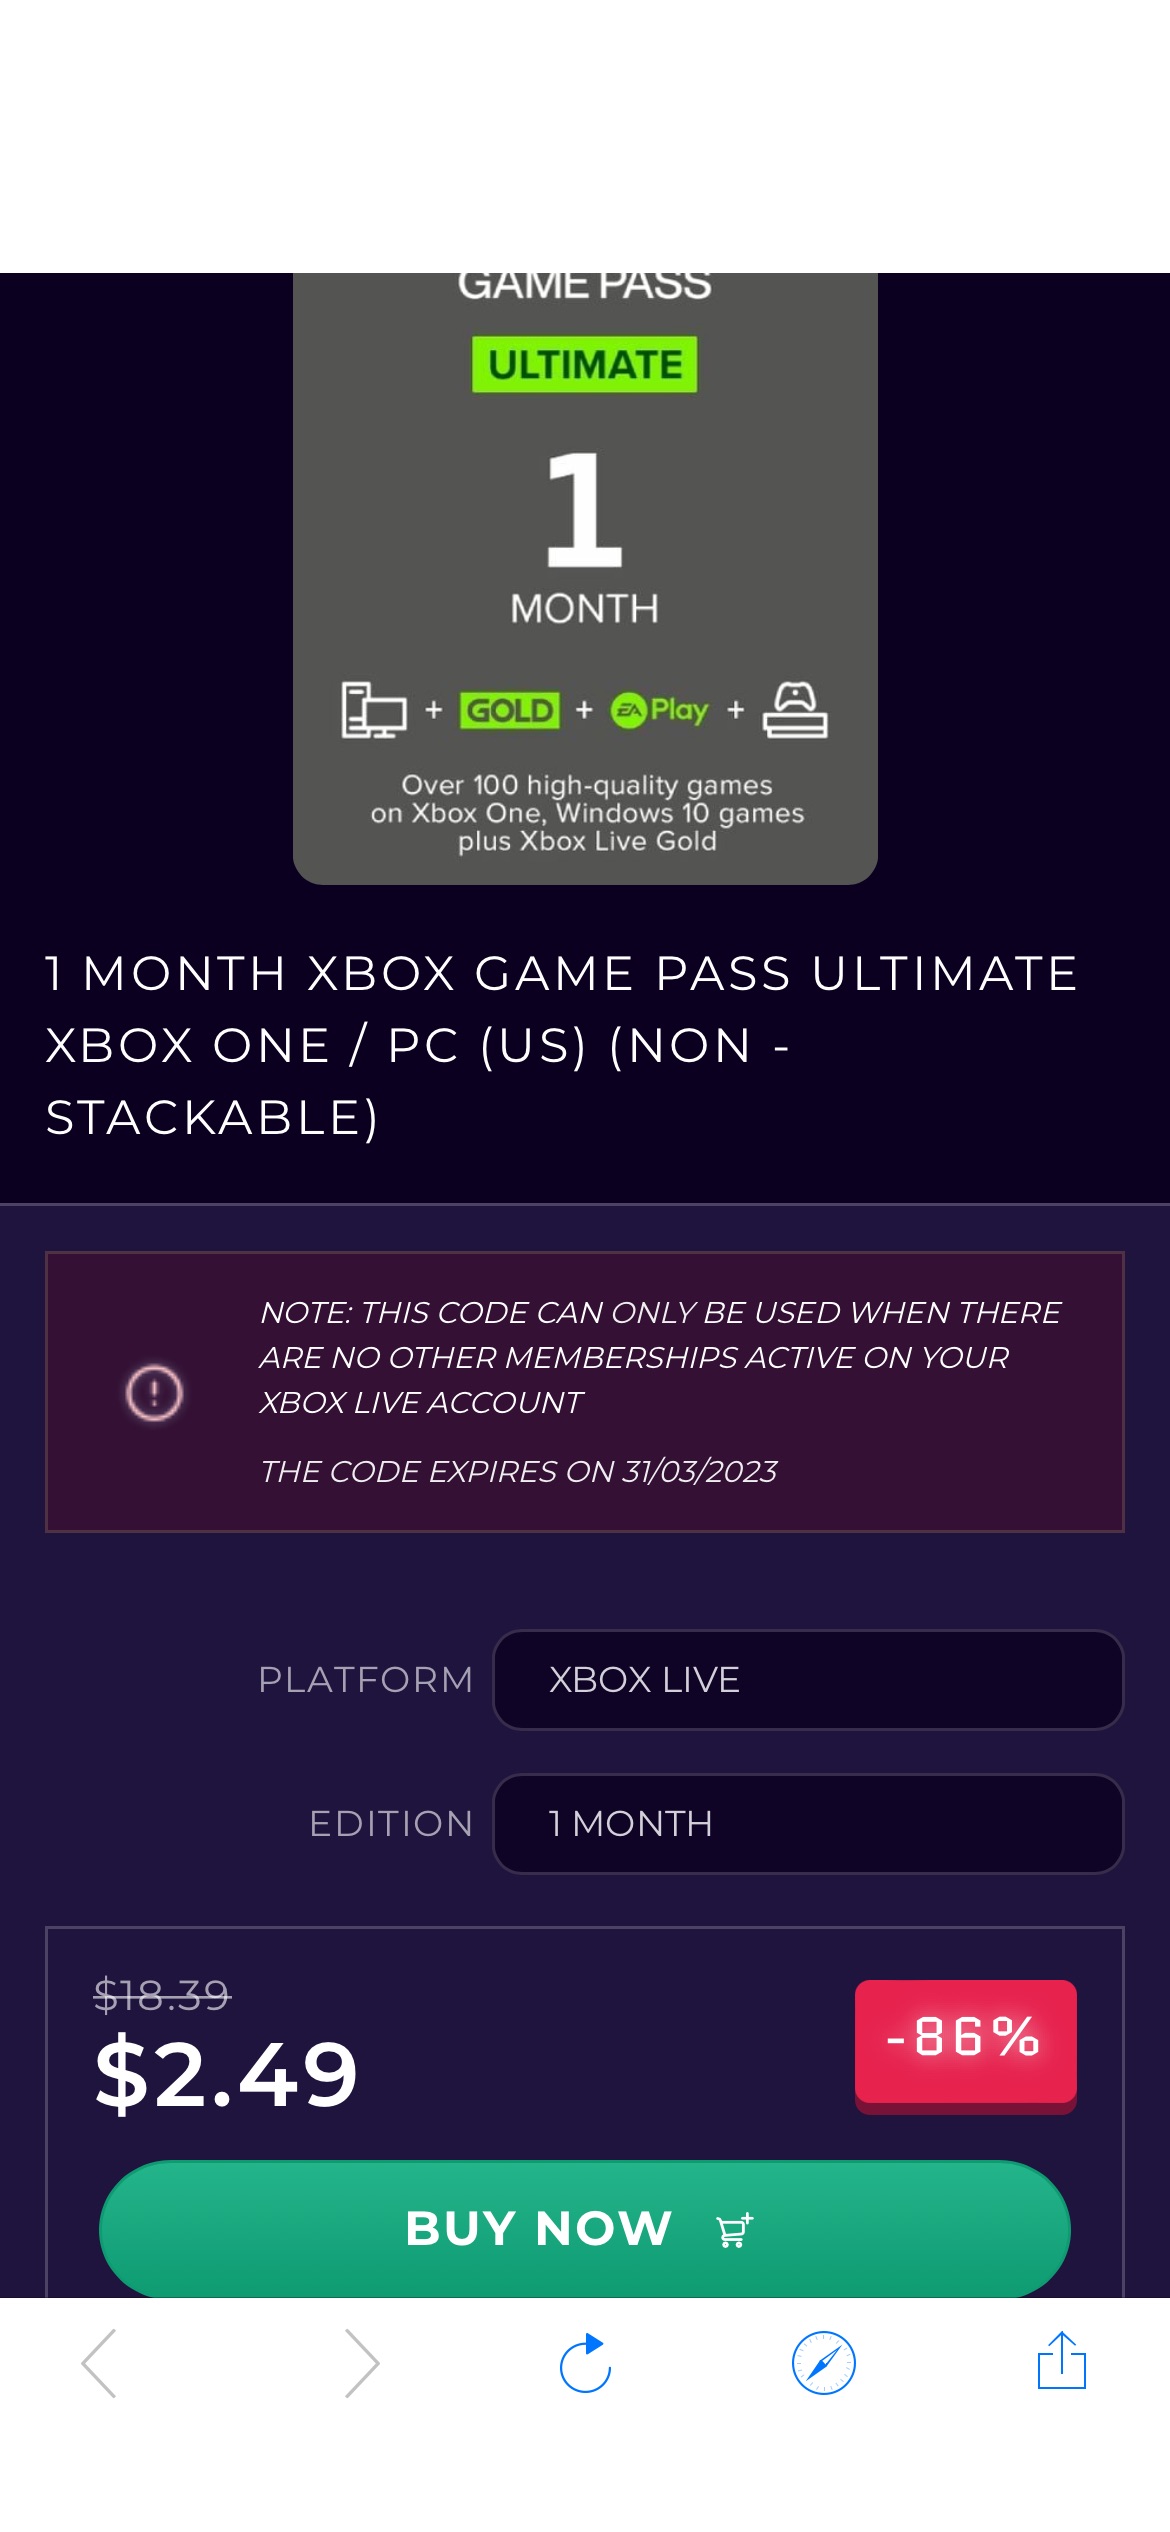 1 Month Xbox Game Pass Ultimate (Non-Stackable) (US) | Xbox One / PC | CDKeys